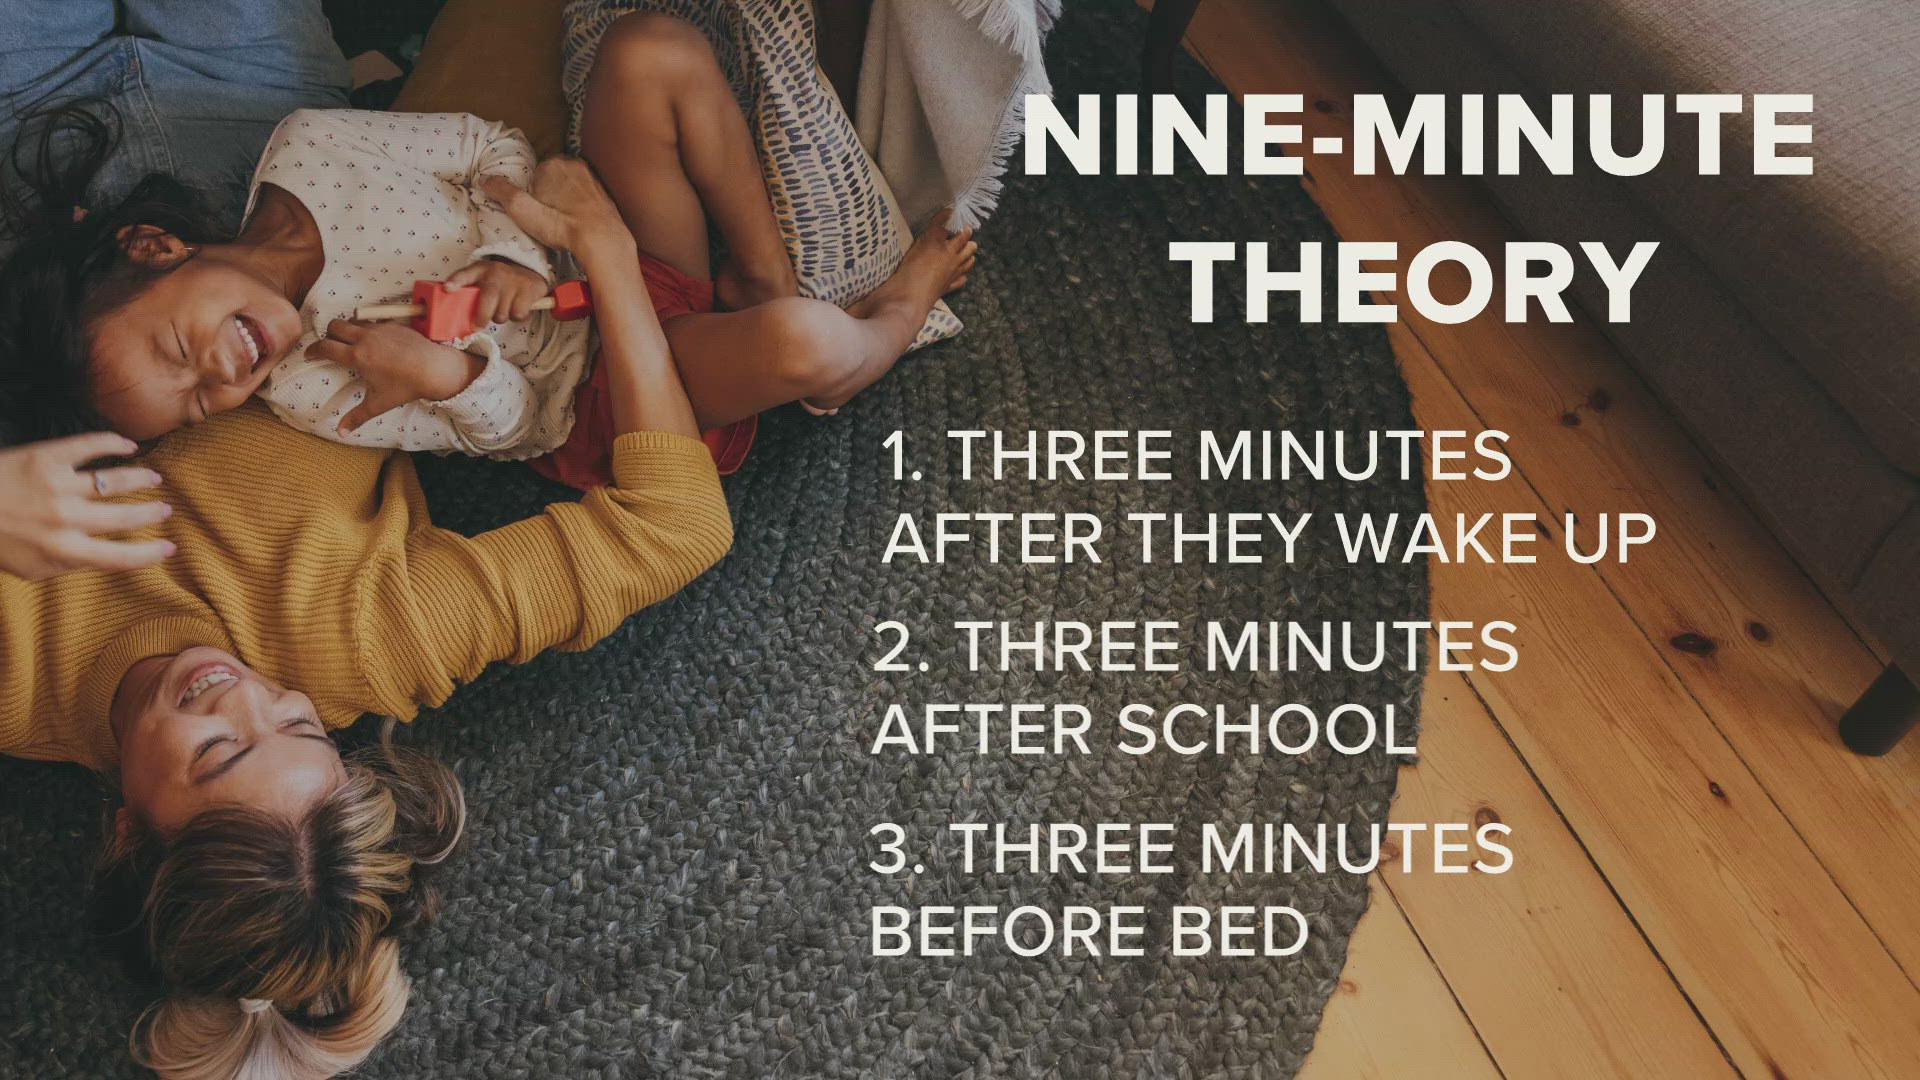 A new theory identifies the most important minutes parents should spend with their children. The nine minutes include when they first wake up, return from school and